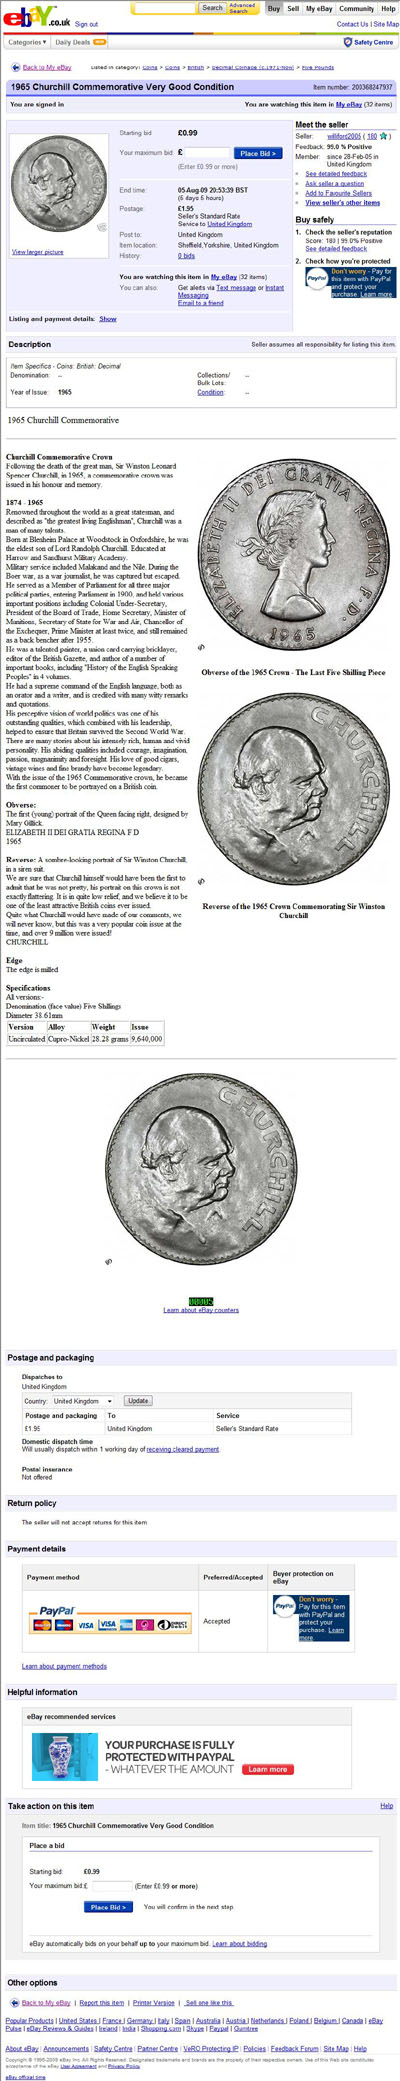 williford2005 eBay Listings Using One of Our 1965 Churchill Crown Images